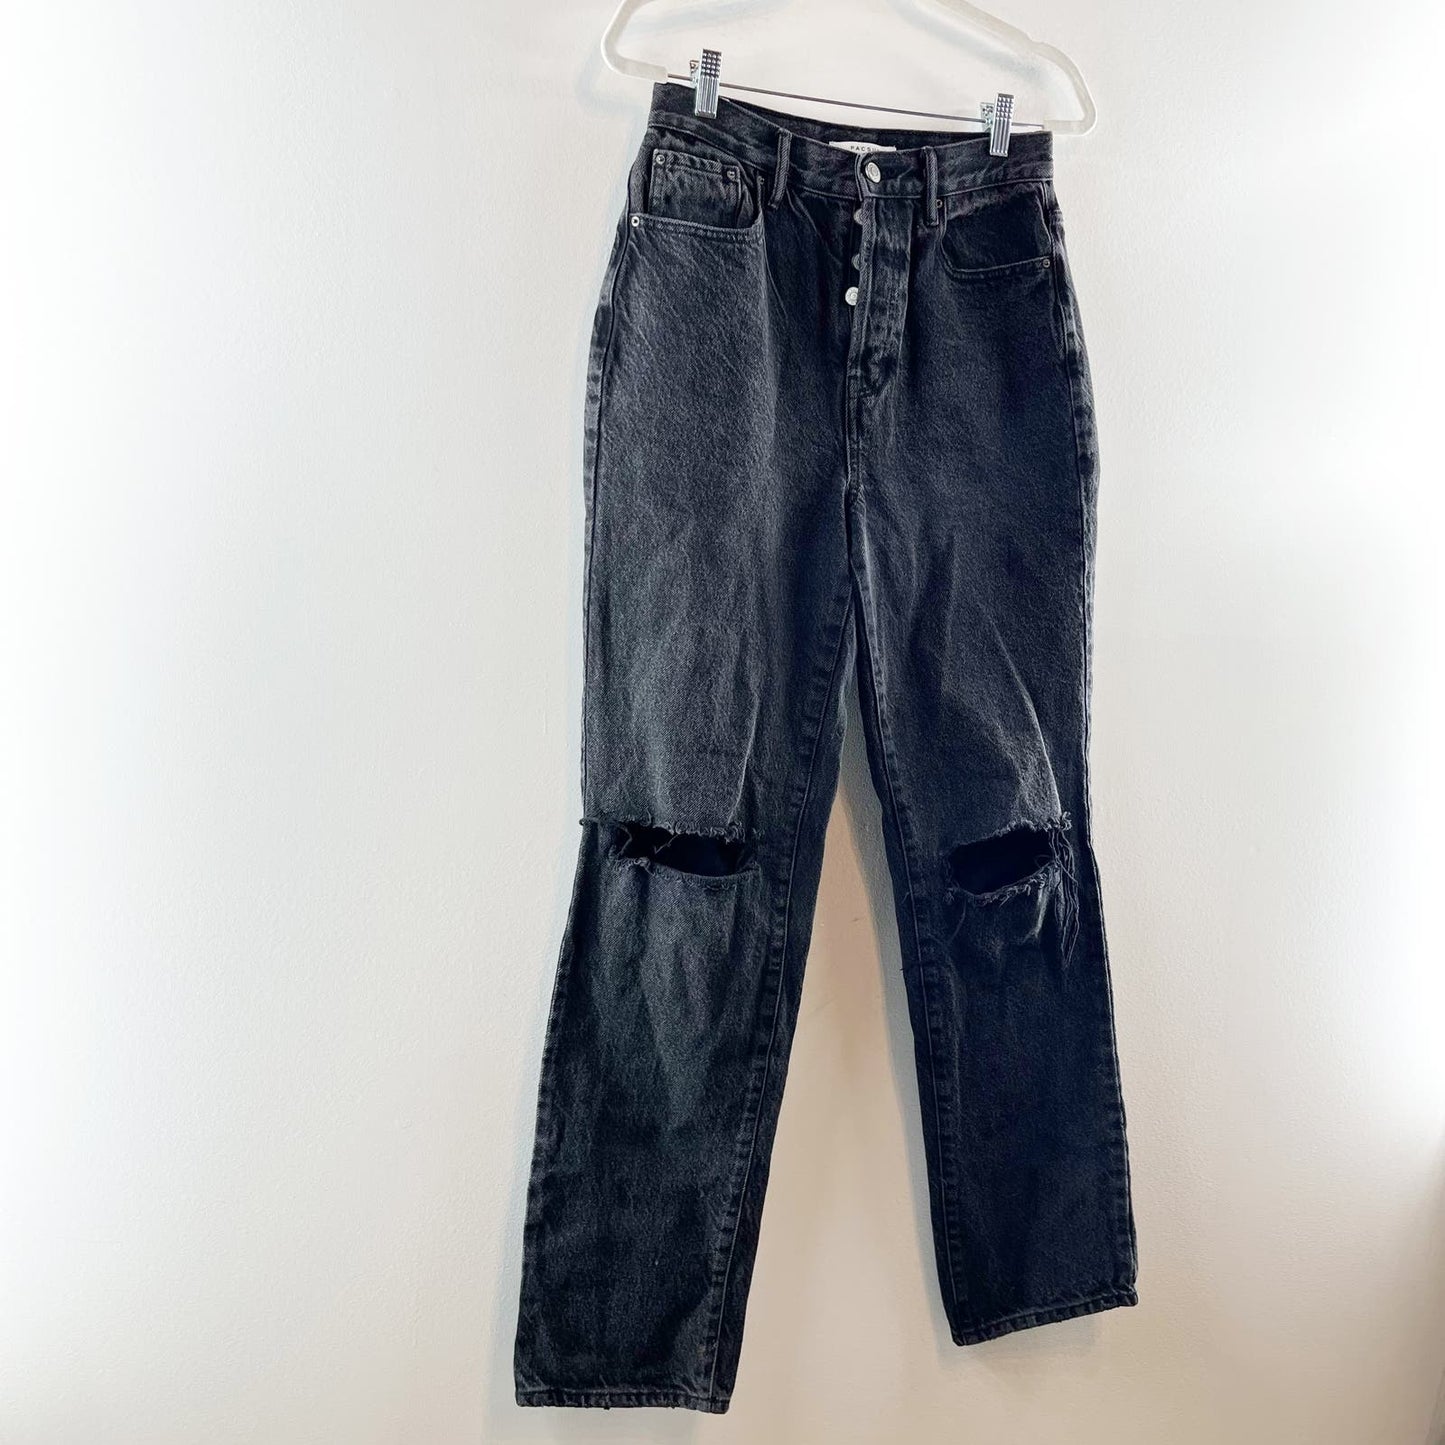 PacSun High Rise Distressed Button Fly Straight Leg Dad Jeans Black 27 / 4